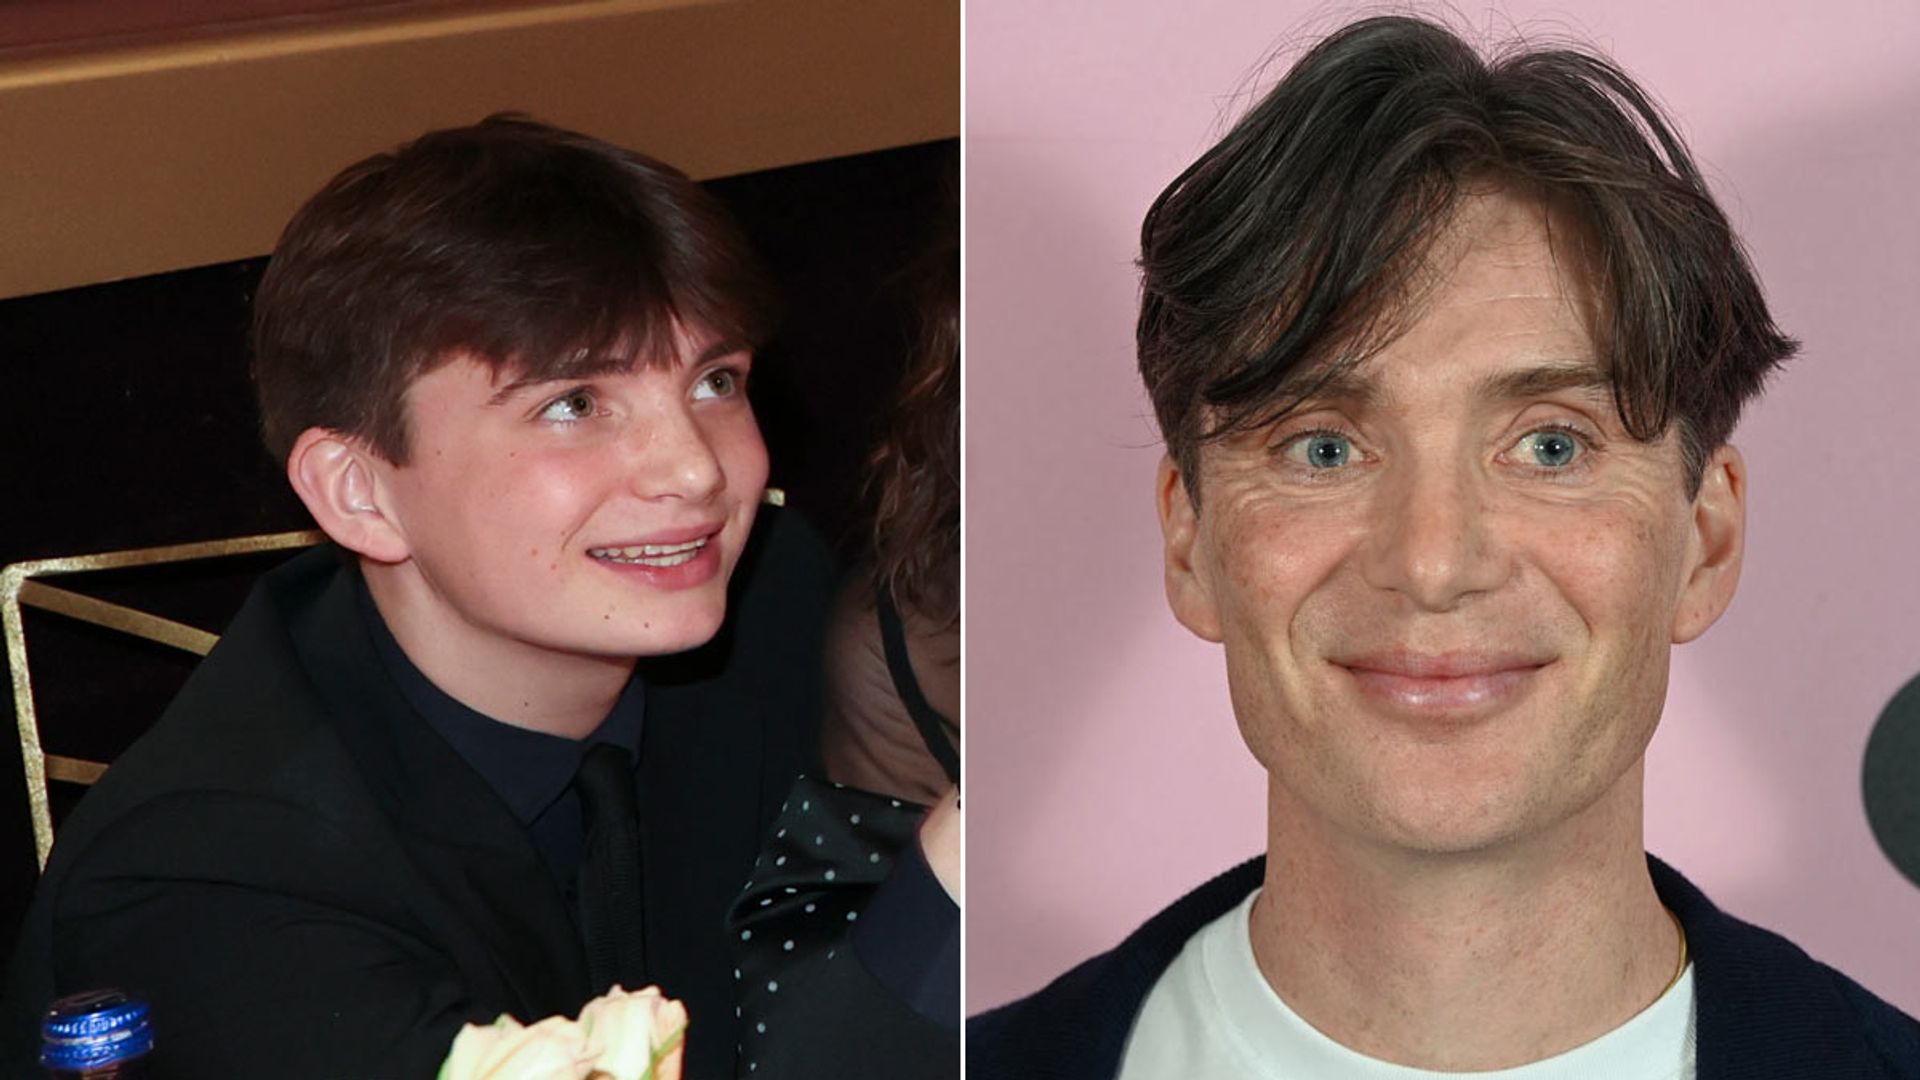 Cillian Murphy's lookalike son Aran set to follow in actor dad's footsteps in Hollywood film